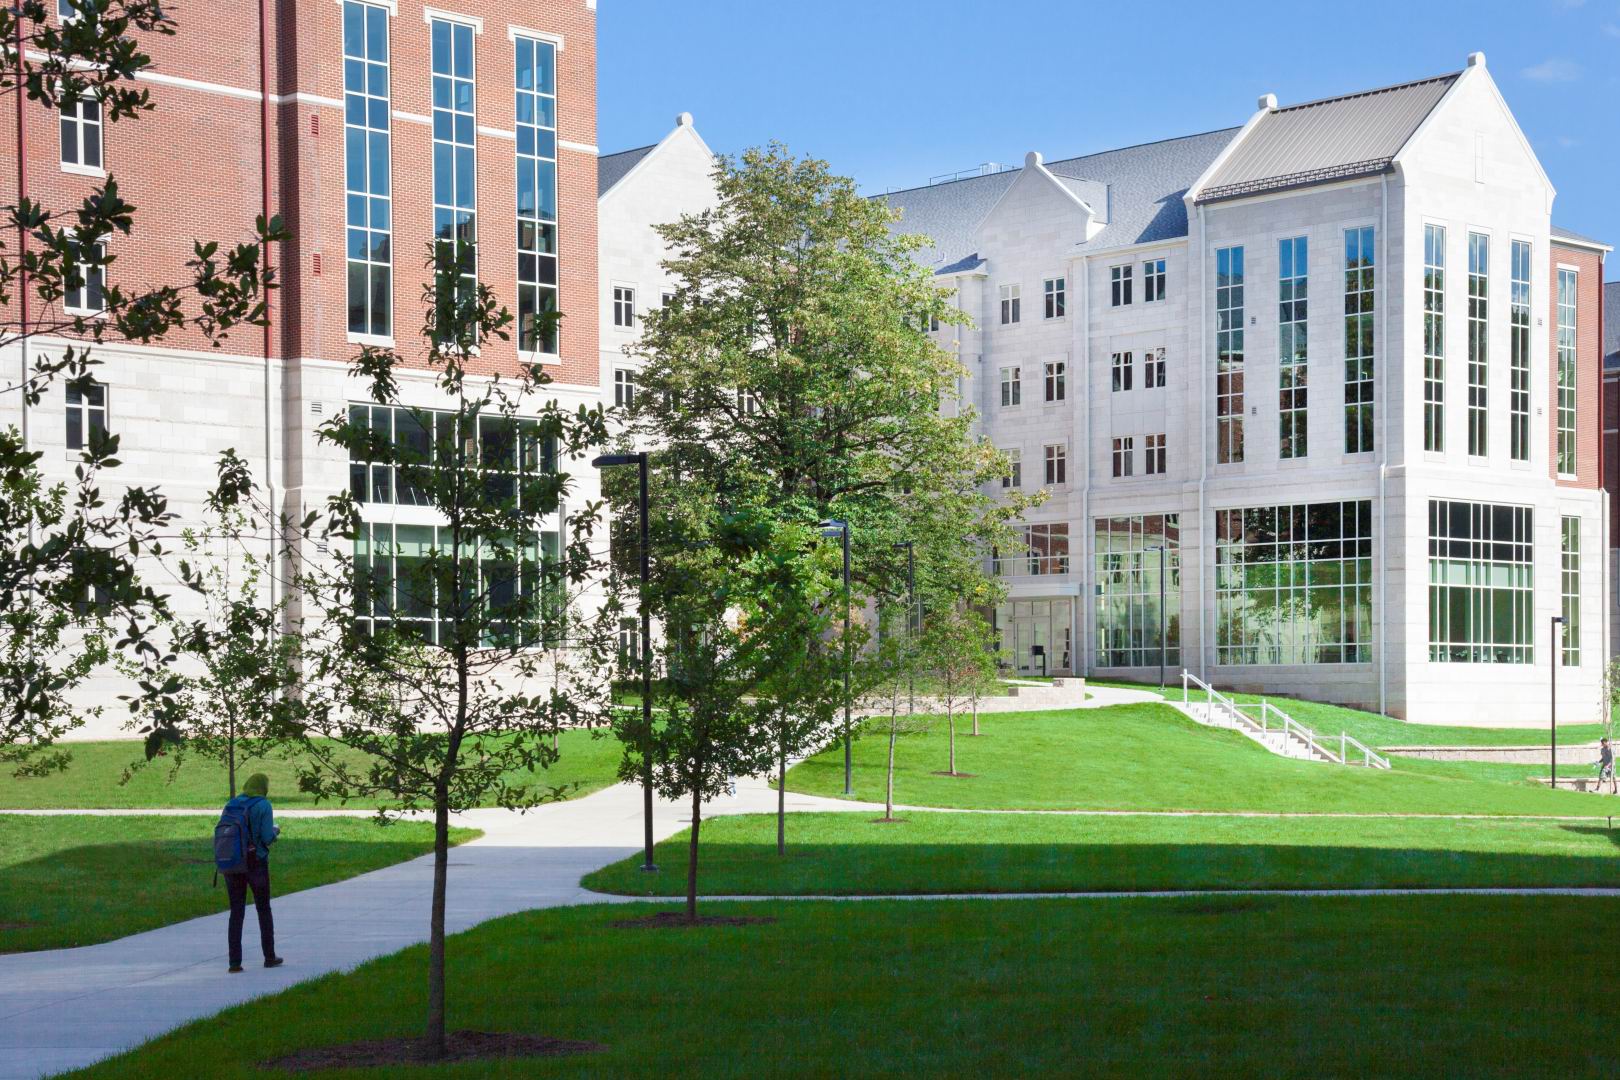 Student walkways into the Woodland Glen Complex and Courtyard